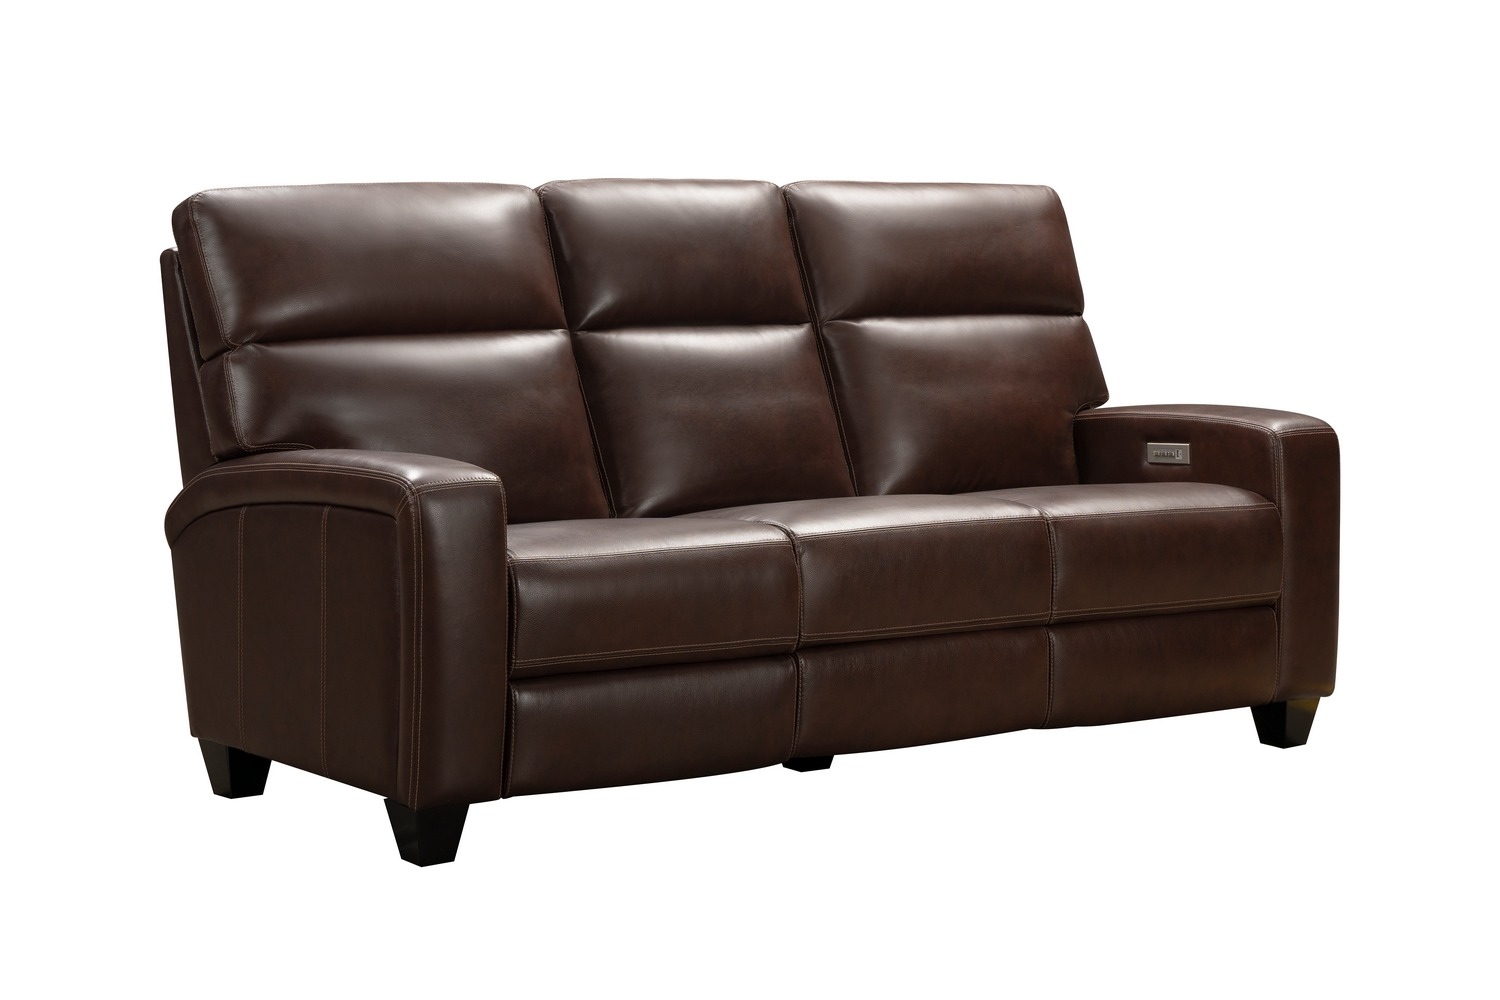 Barcalounger Marcello Power Reclining Sofa with Power Head Rests and Power Lumbar - Castleton Rustic Brown/Leather Match